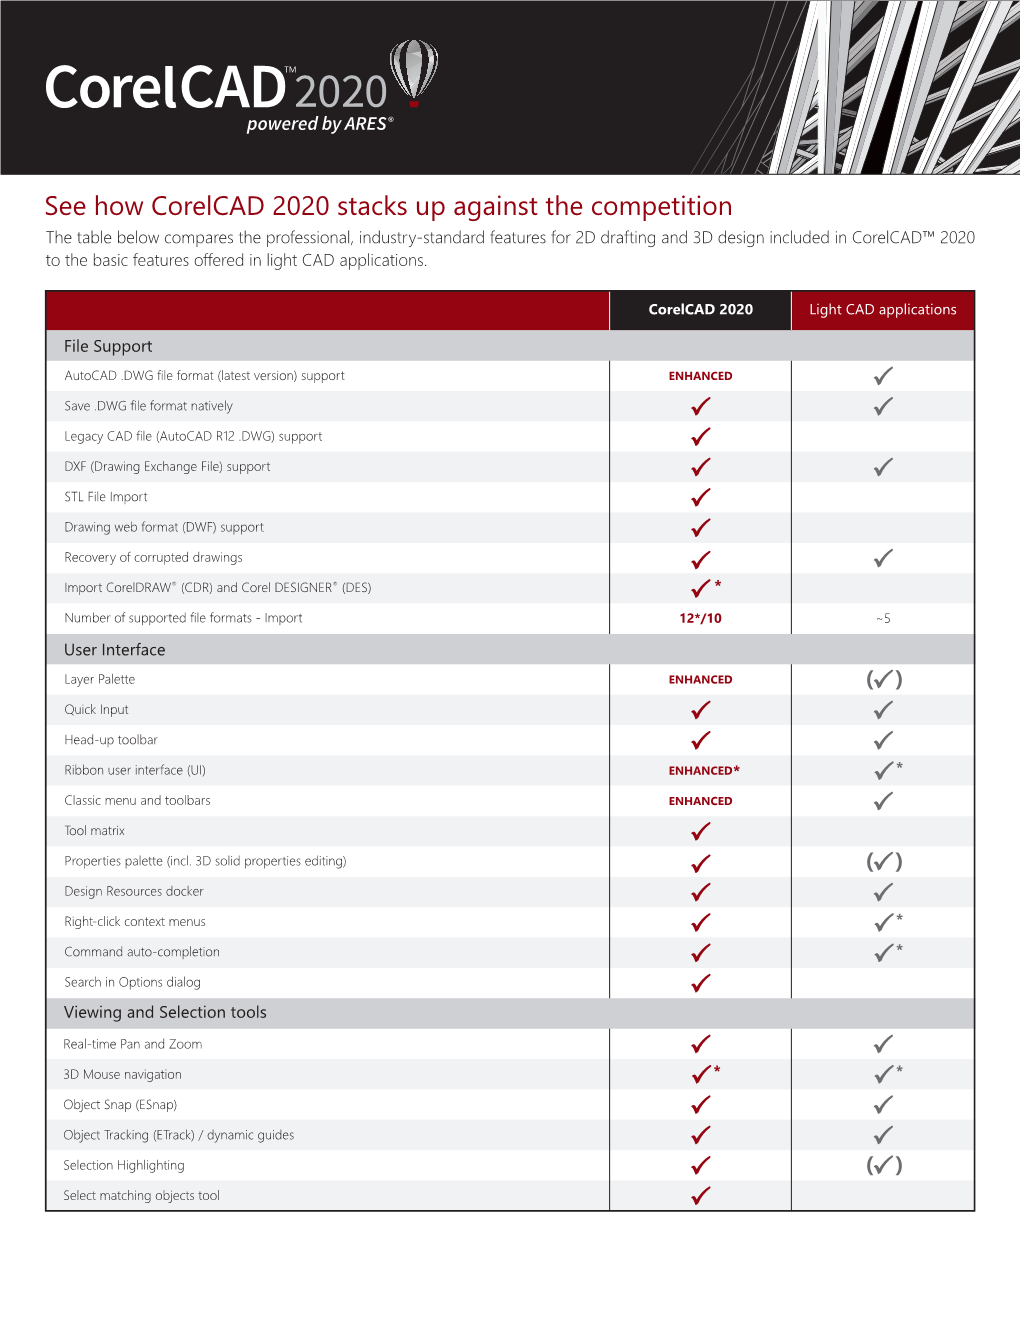 See How Corelcad 2020 Stacks up Against the Competition